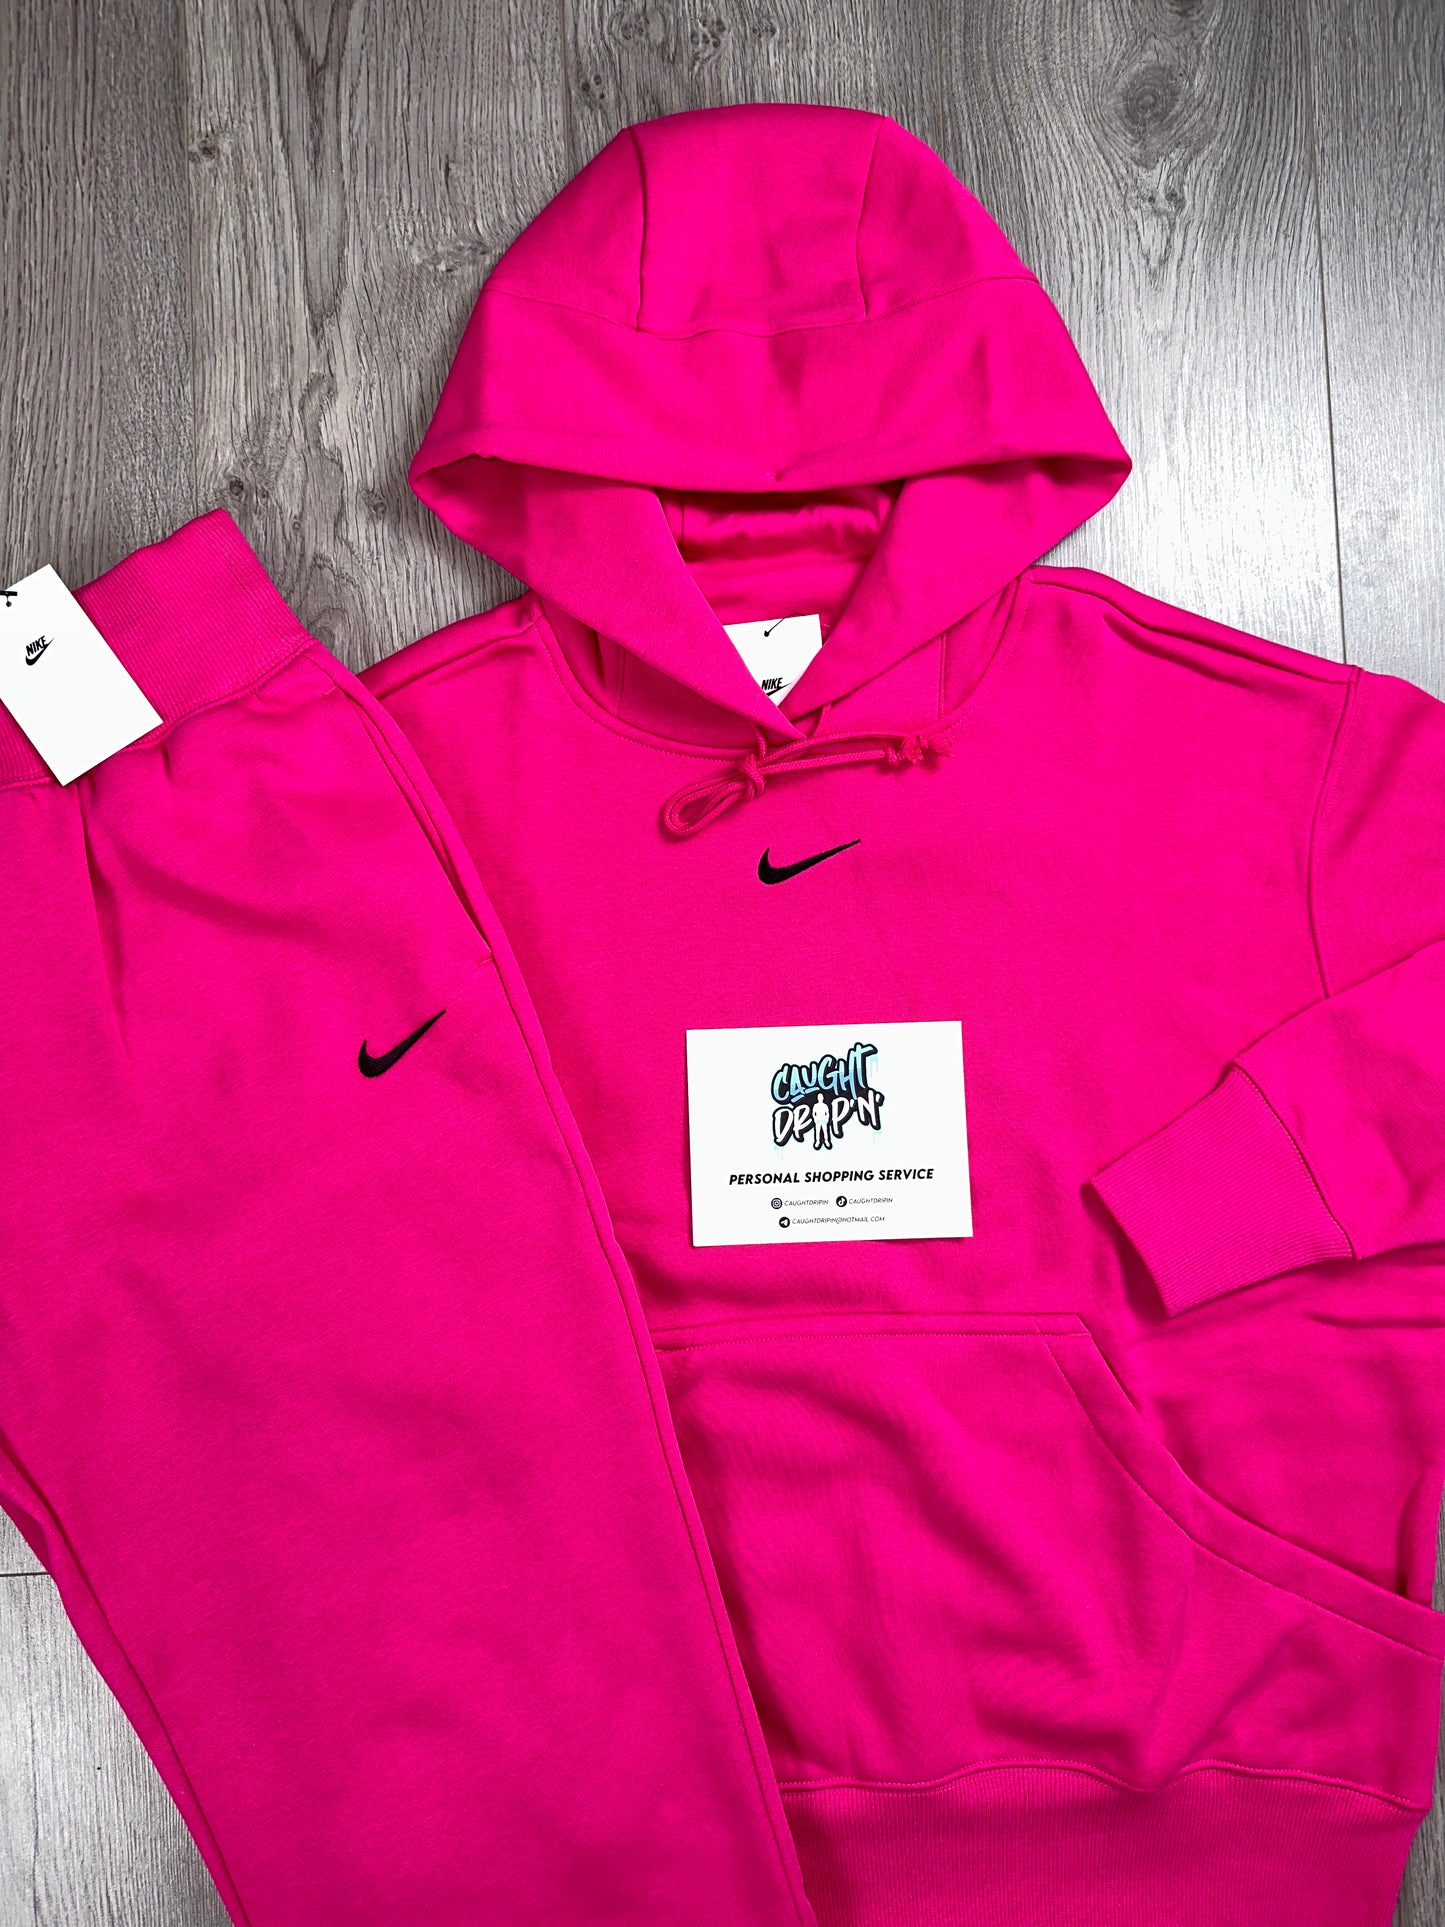 Women’s Hot Pink Oversized Tracksuit